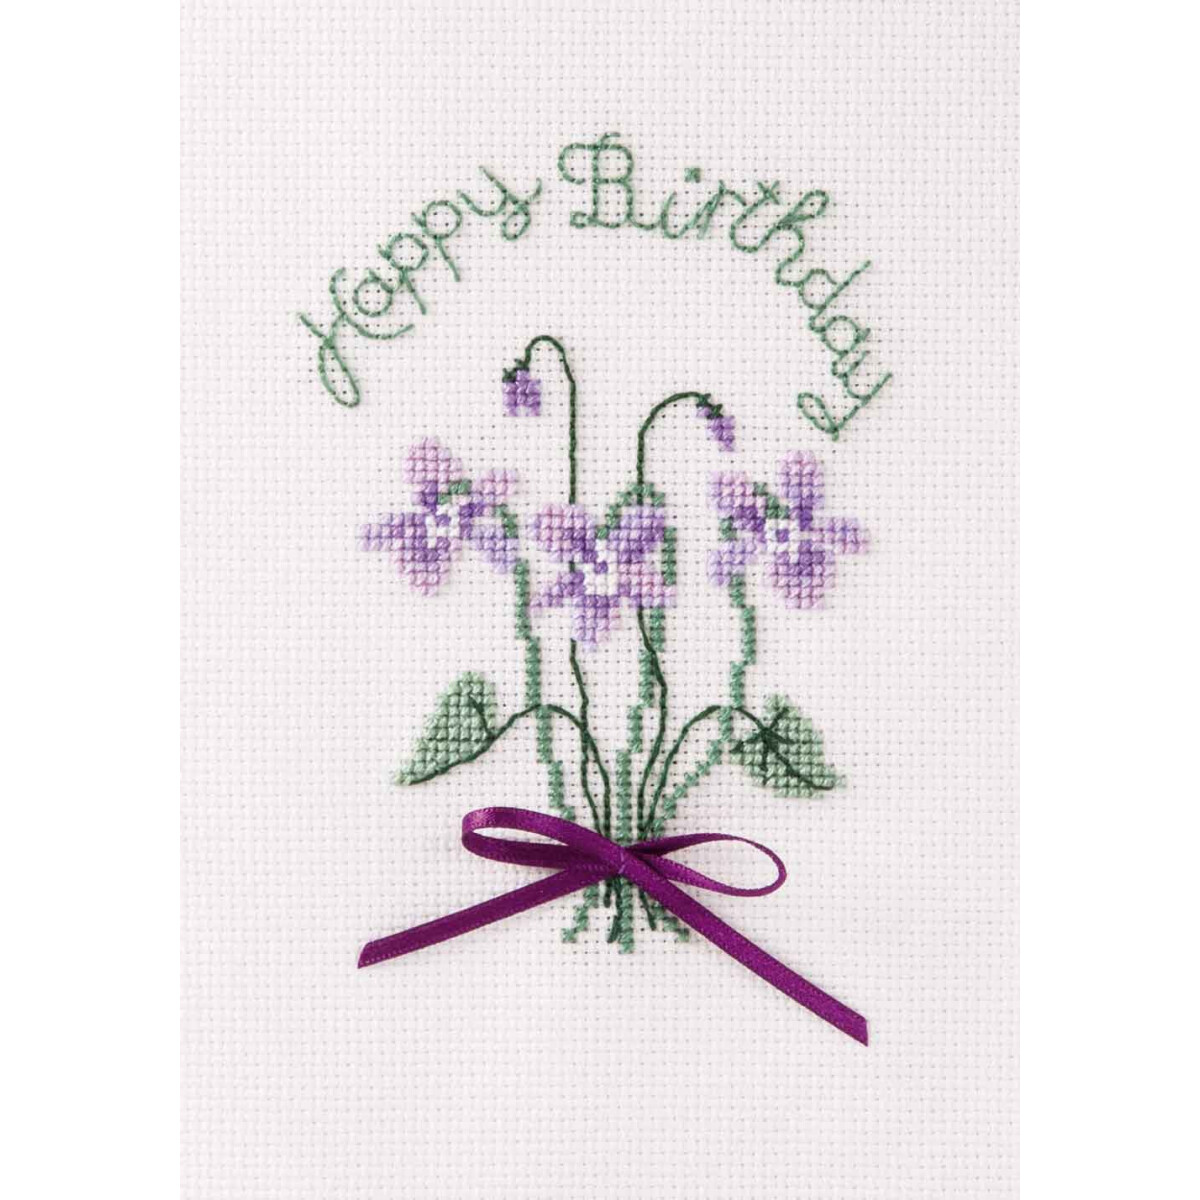 A cross stitch design on white fabric, known as an...